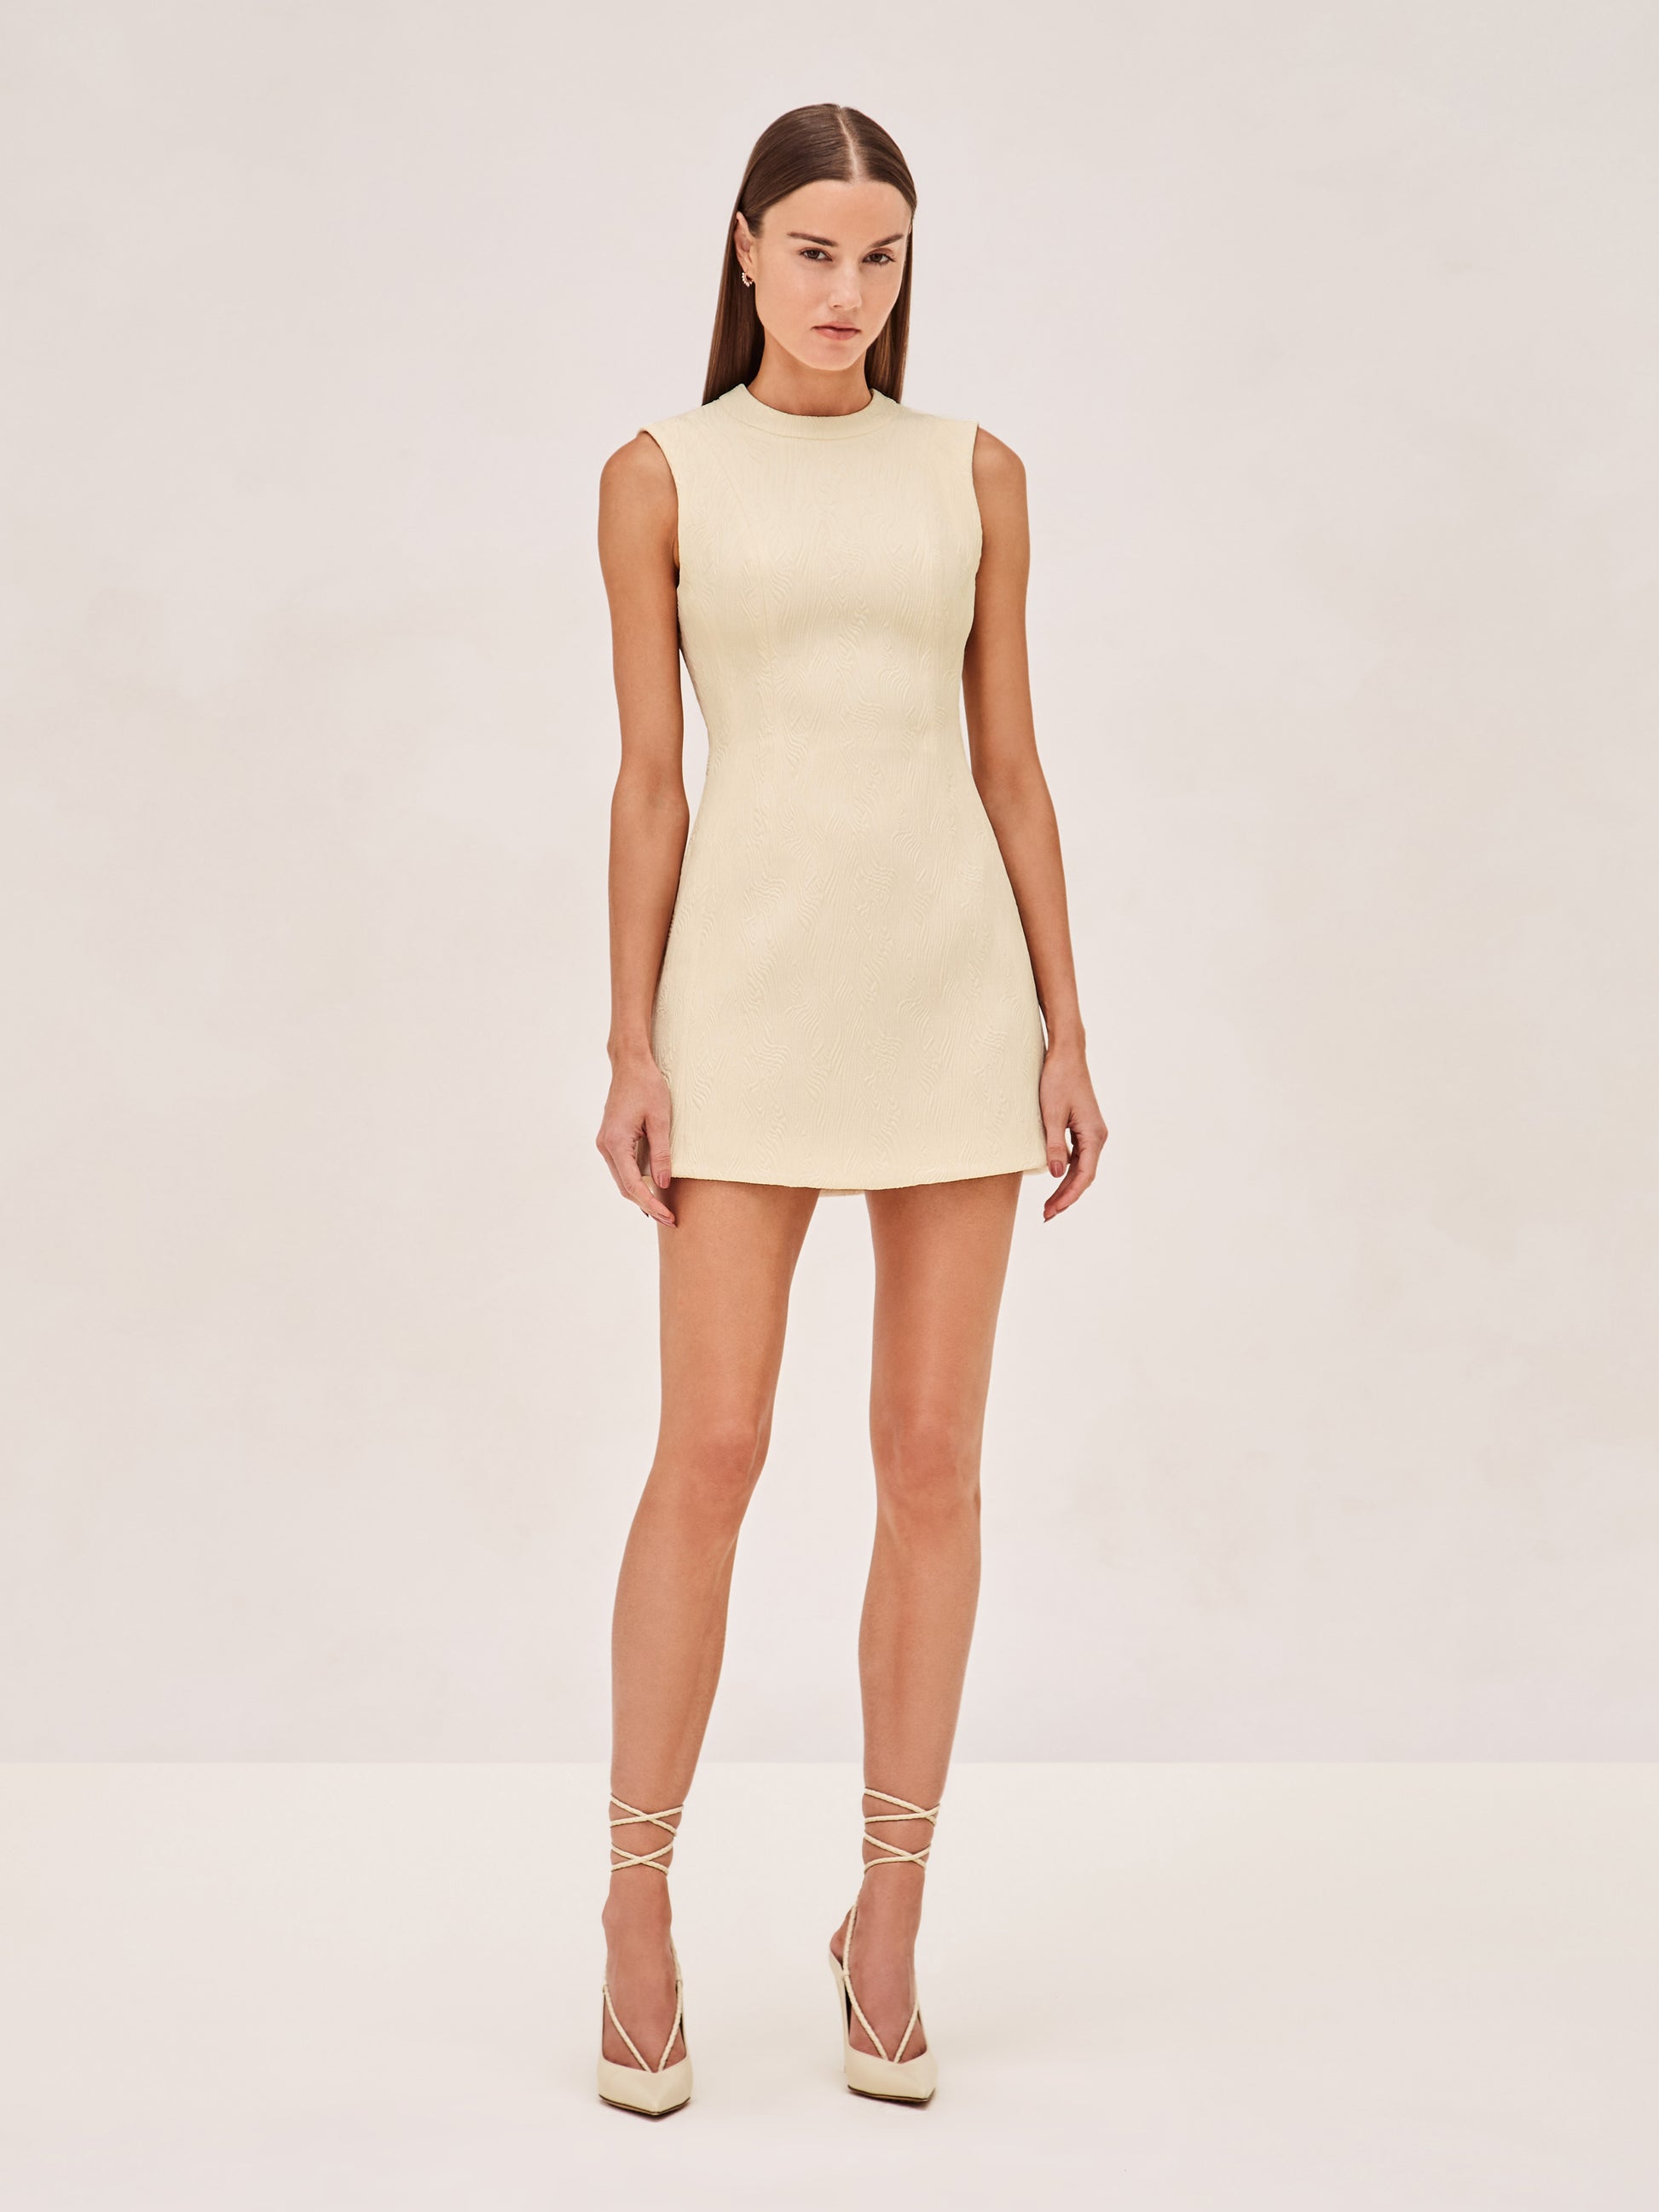 Alexis Andria sleevless mini dress in ivory.